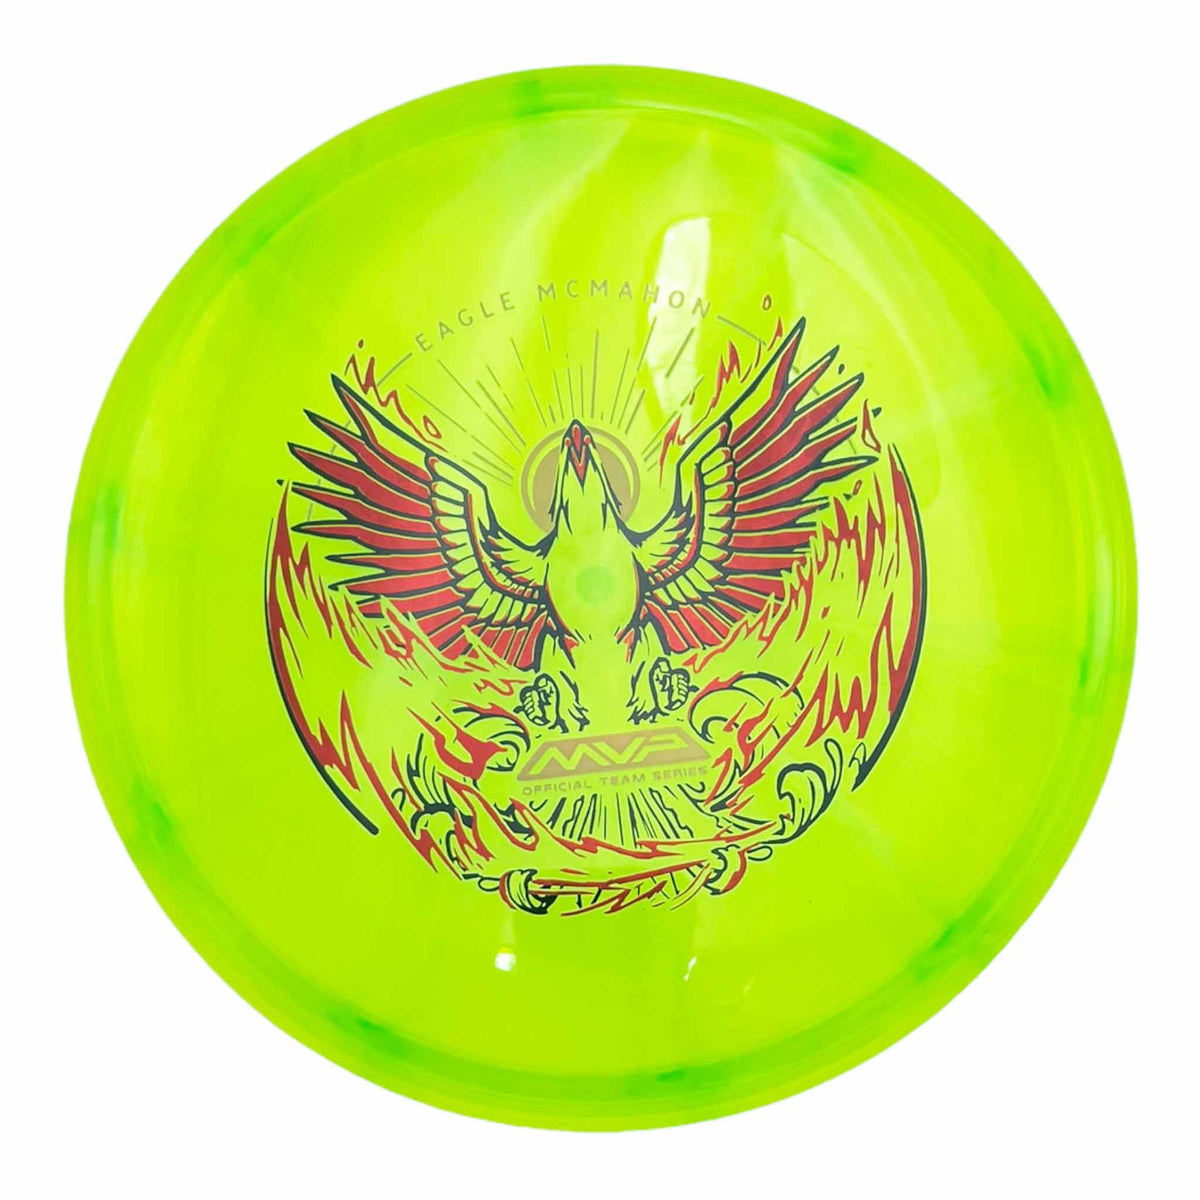 Axiom Discs Prism Proton Eagle McMahon Envy putter and approach - Lime Green